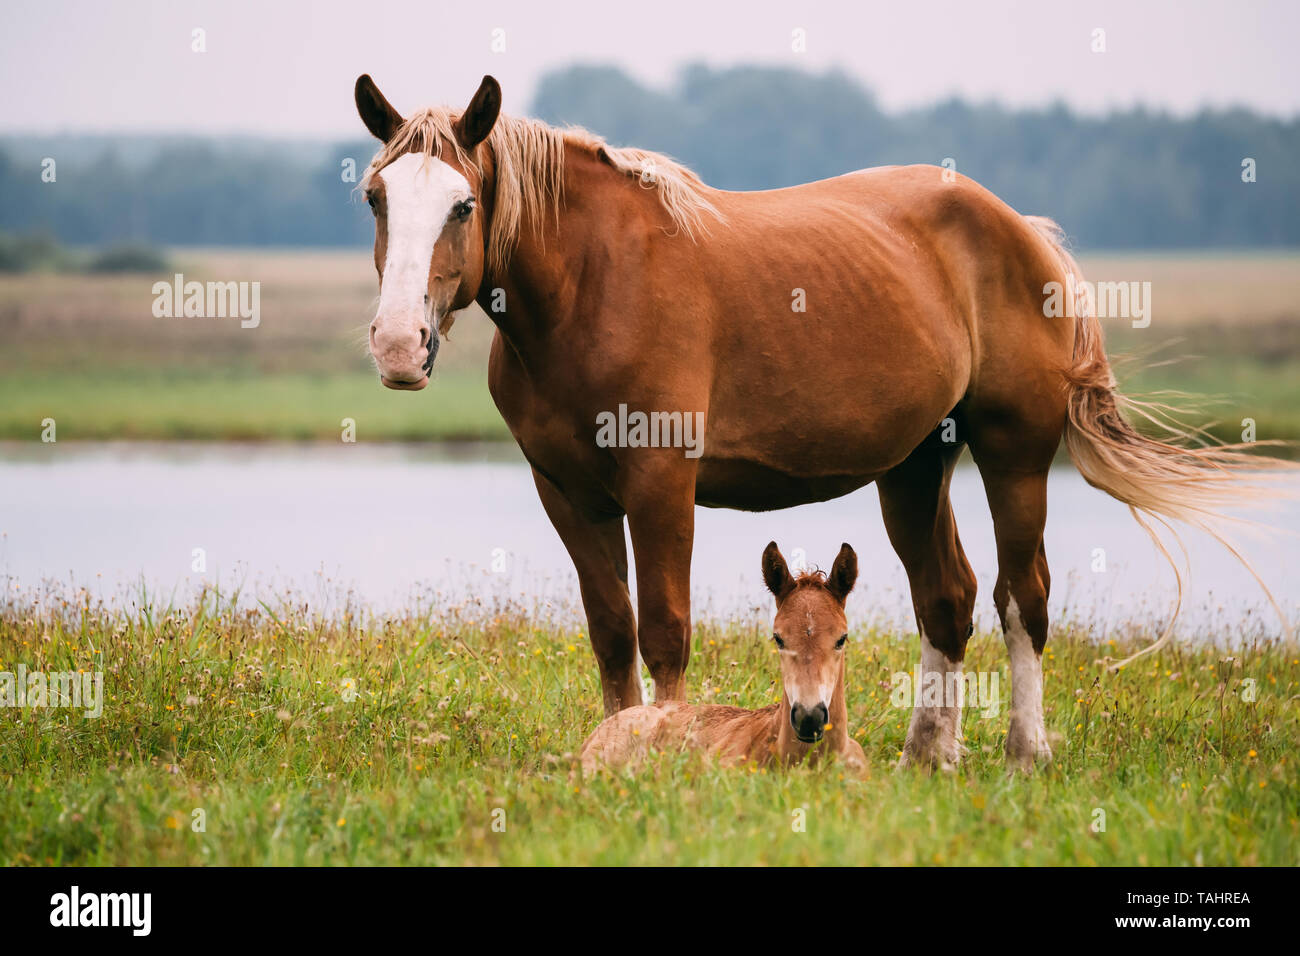 Adult Brown Horse And Foal Young Horse Grazing On Green Meadow Near River In Summer Season. Belarus. Stock Photo